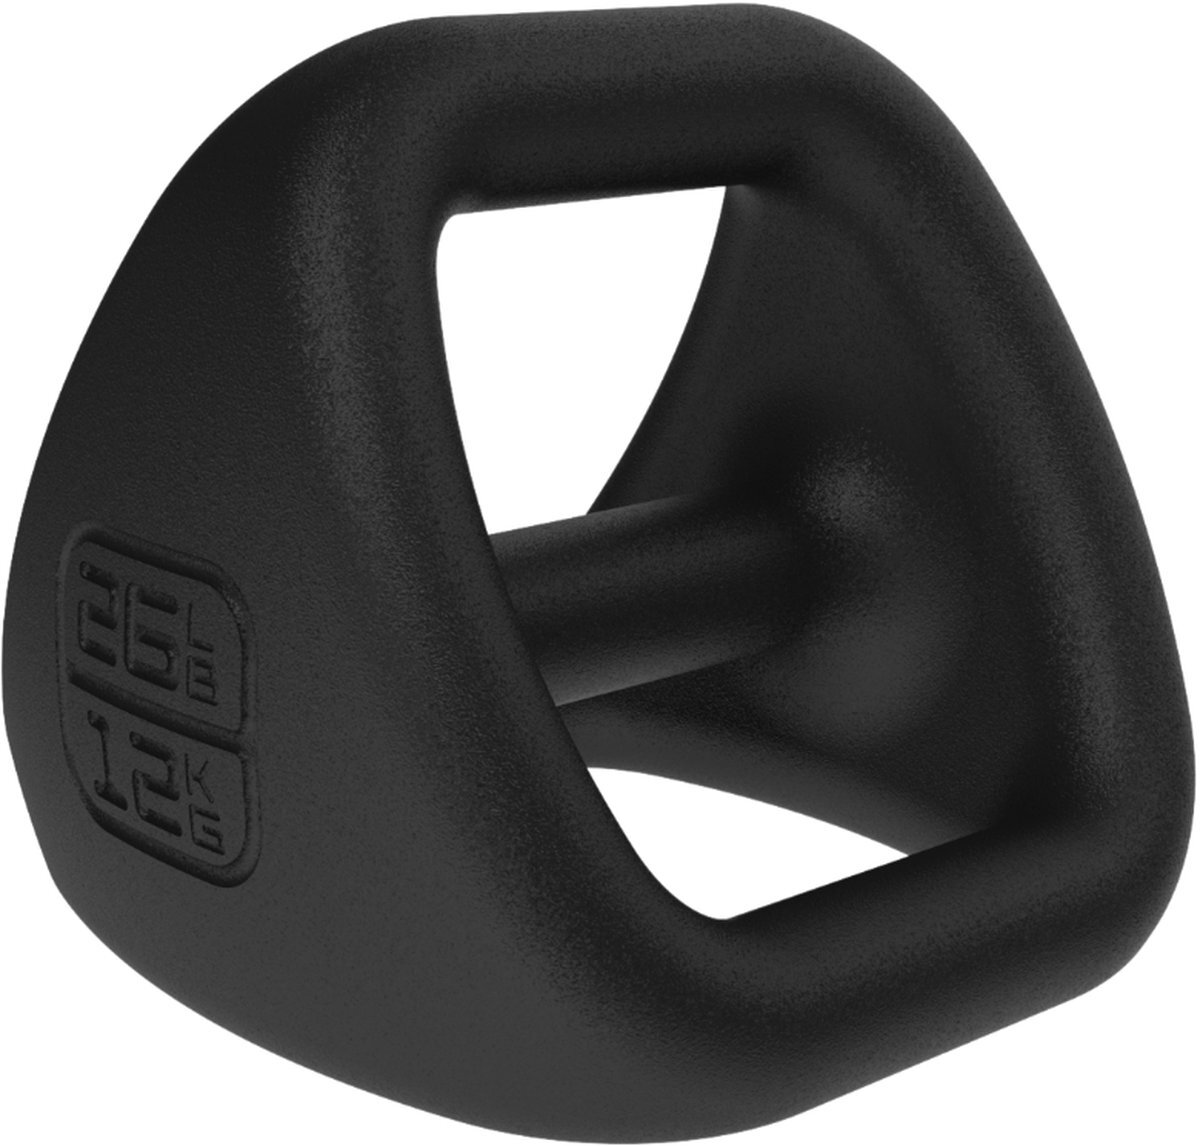 Ybell Fitness YBell Pro 12kg